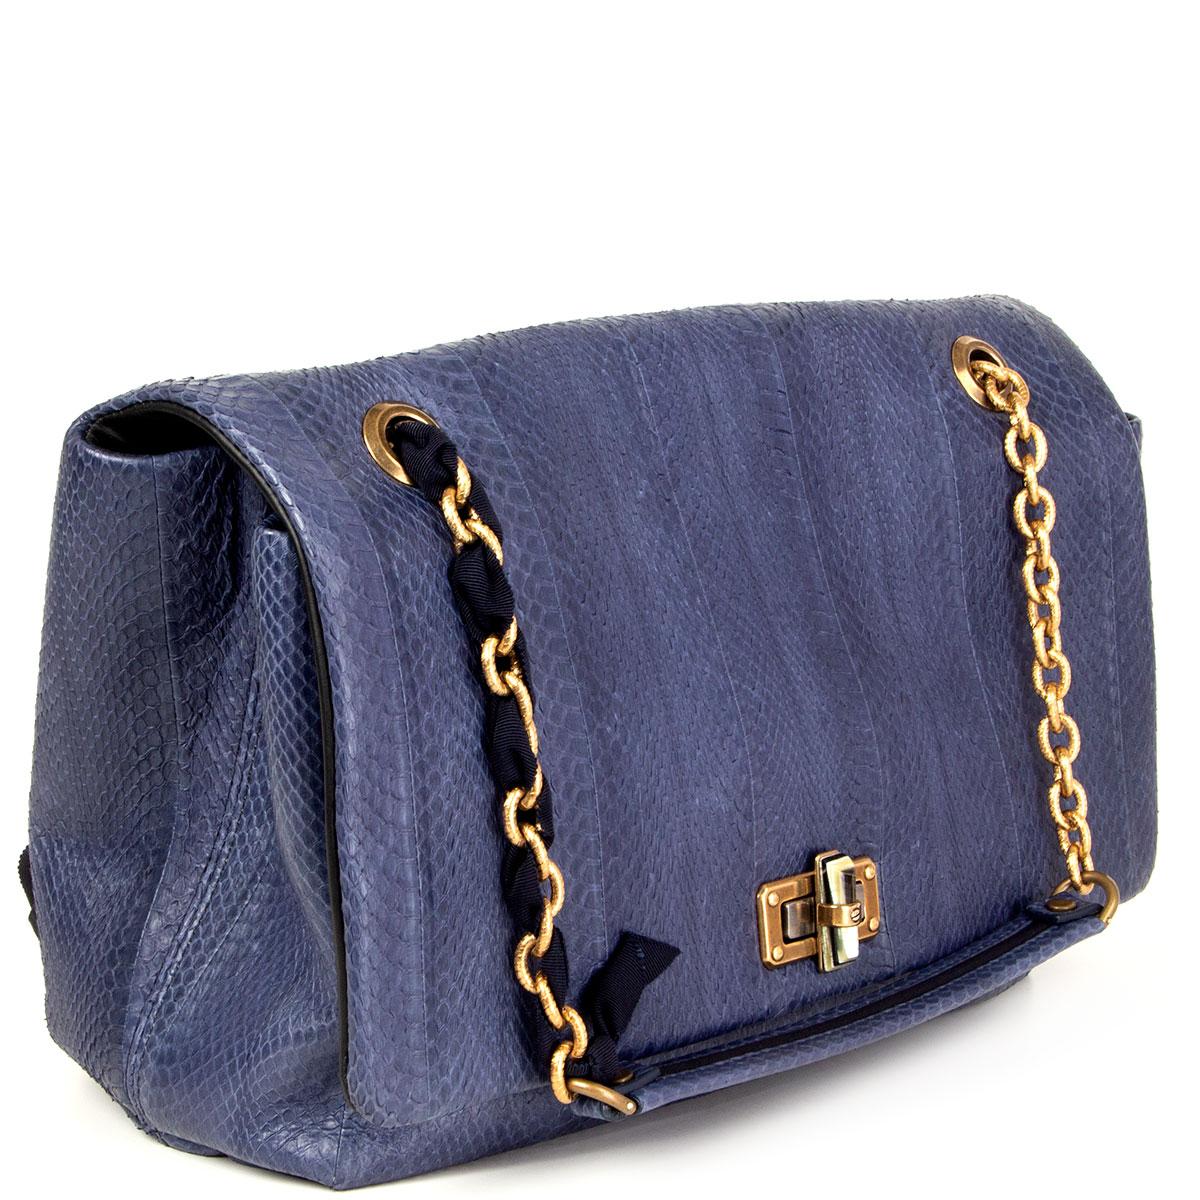 100% authentic Lanvin 'Happy' twist-lock shoulder bag in smokey blue python leather (100%) with shoulder strap in gold-tone metal chain, smokey blue python leather and a blue ribbon embellishment. Closes with a twist-lock on the front and inside is